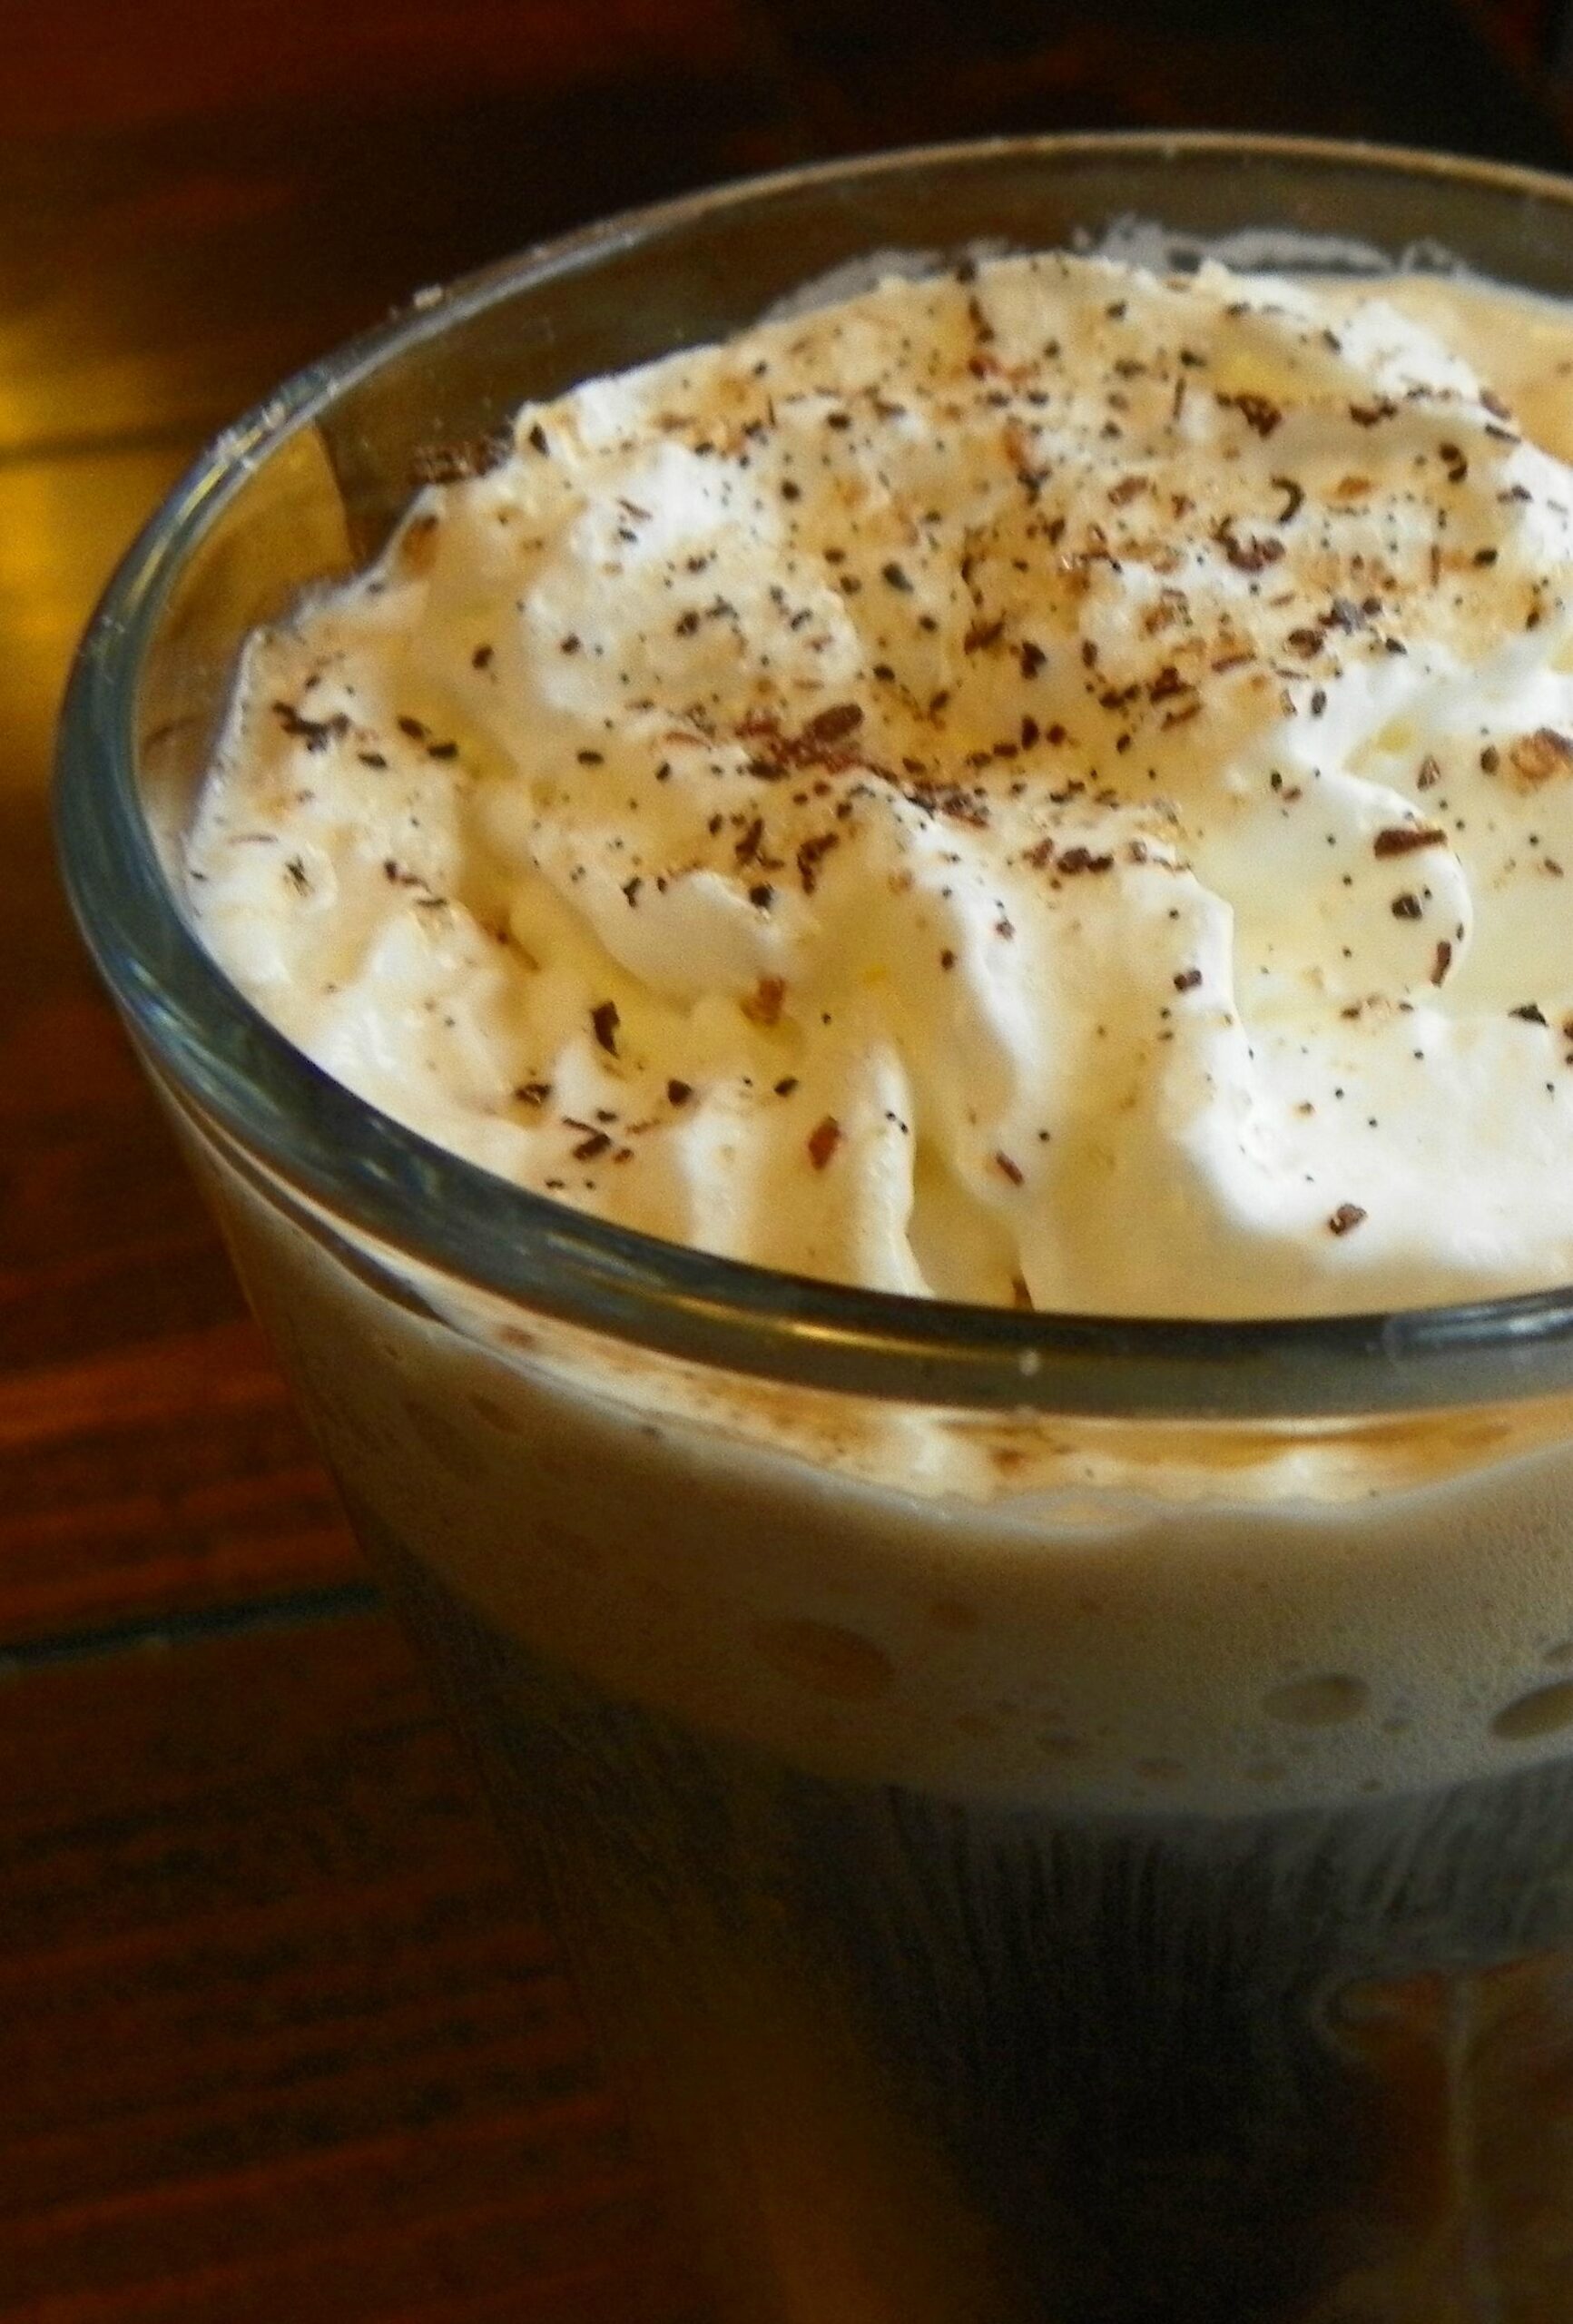  Wake up and spice up your coffee game with this Spiced Rum Breakfast Coffee!